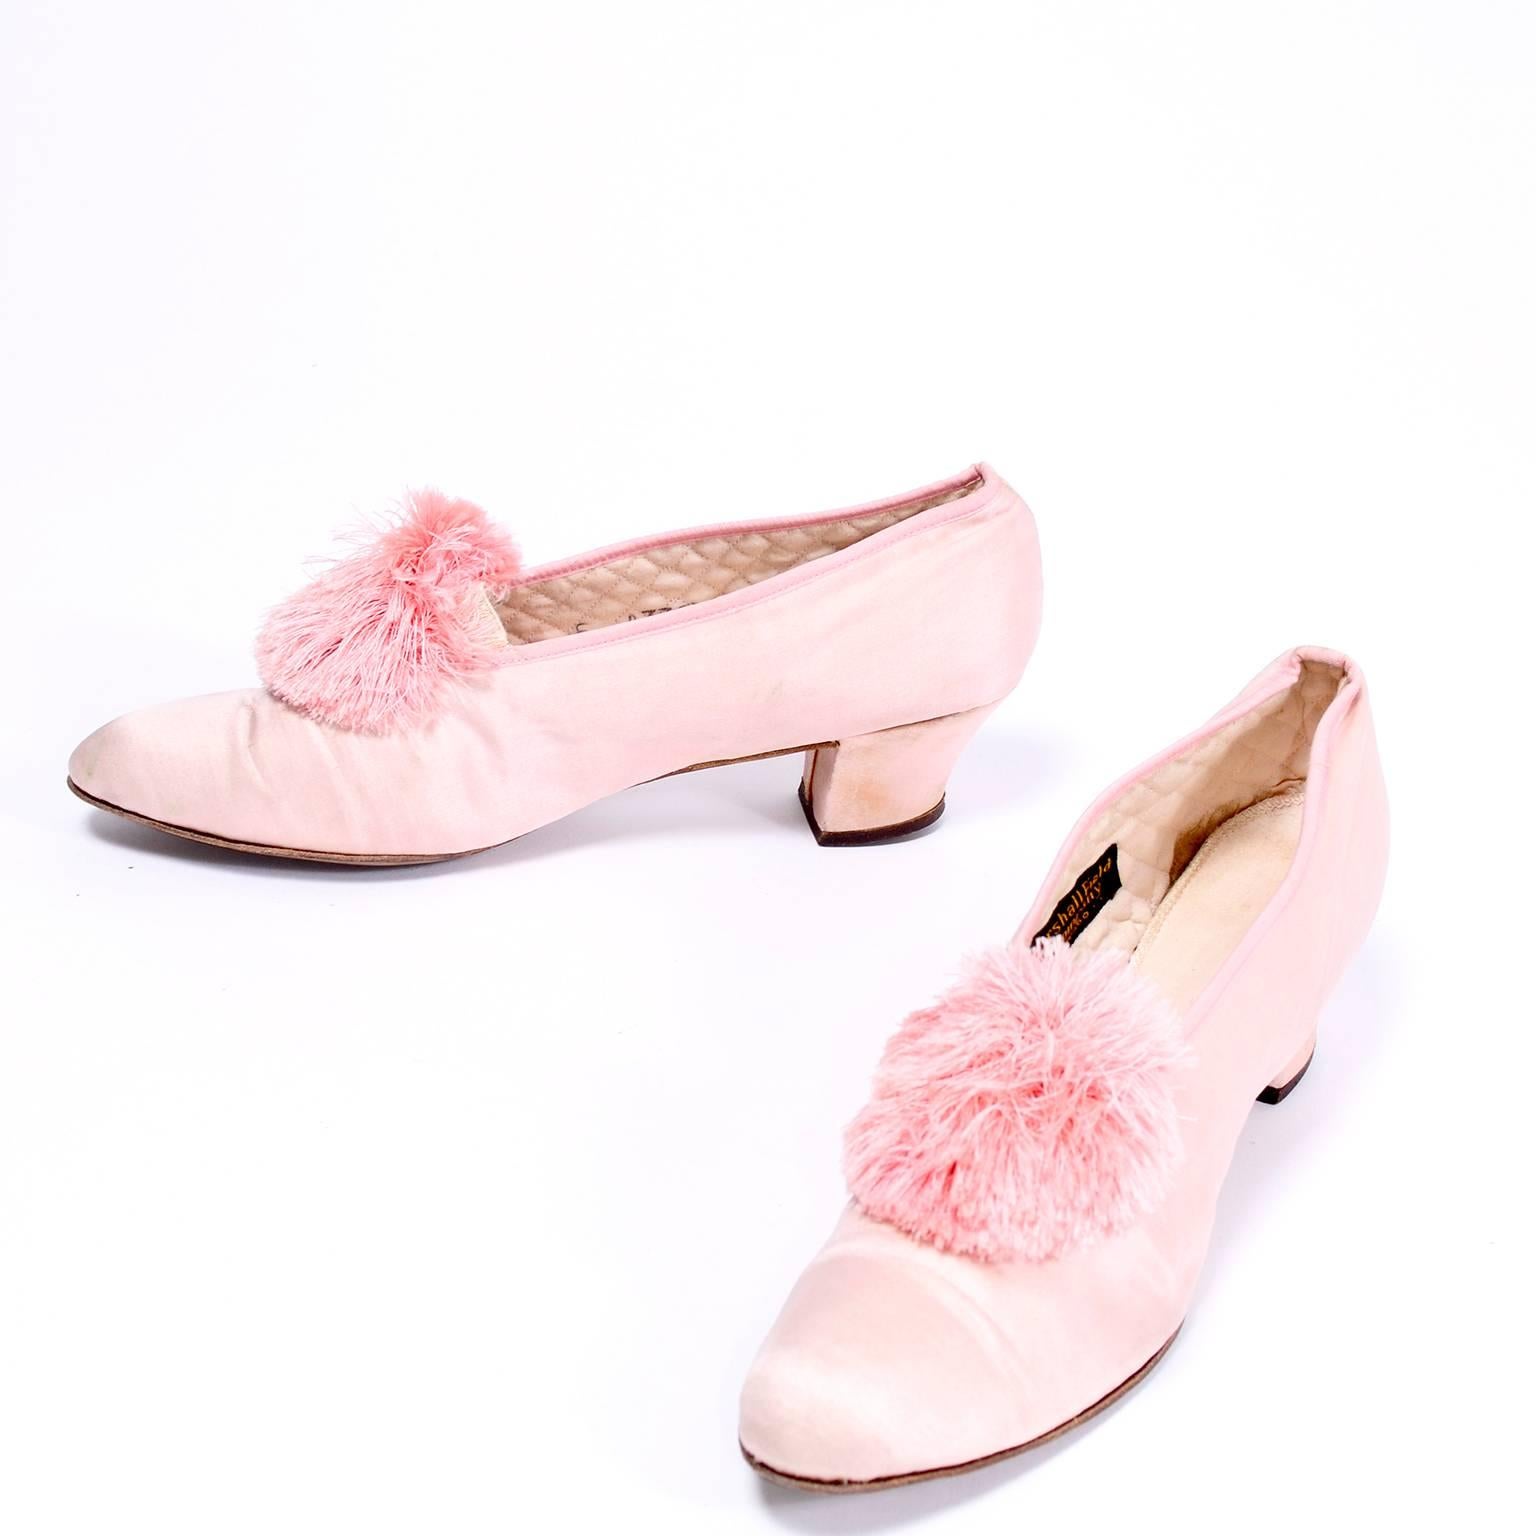 These beautiful pink satin shoes are from the late teens and we acquired them from an estate we purchased that included many high end articles of clothing and shoes from the 1910's through the 1960's.  This woman was a socialite who wore incredible